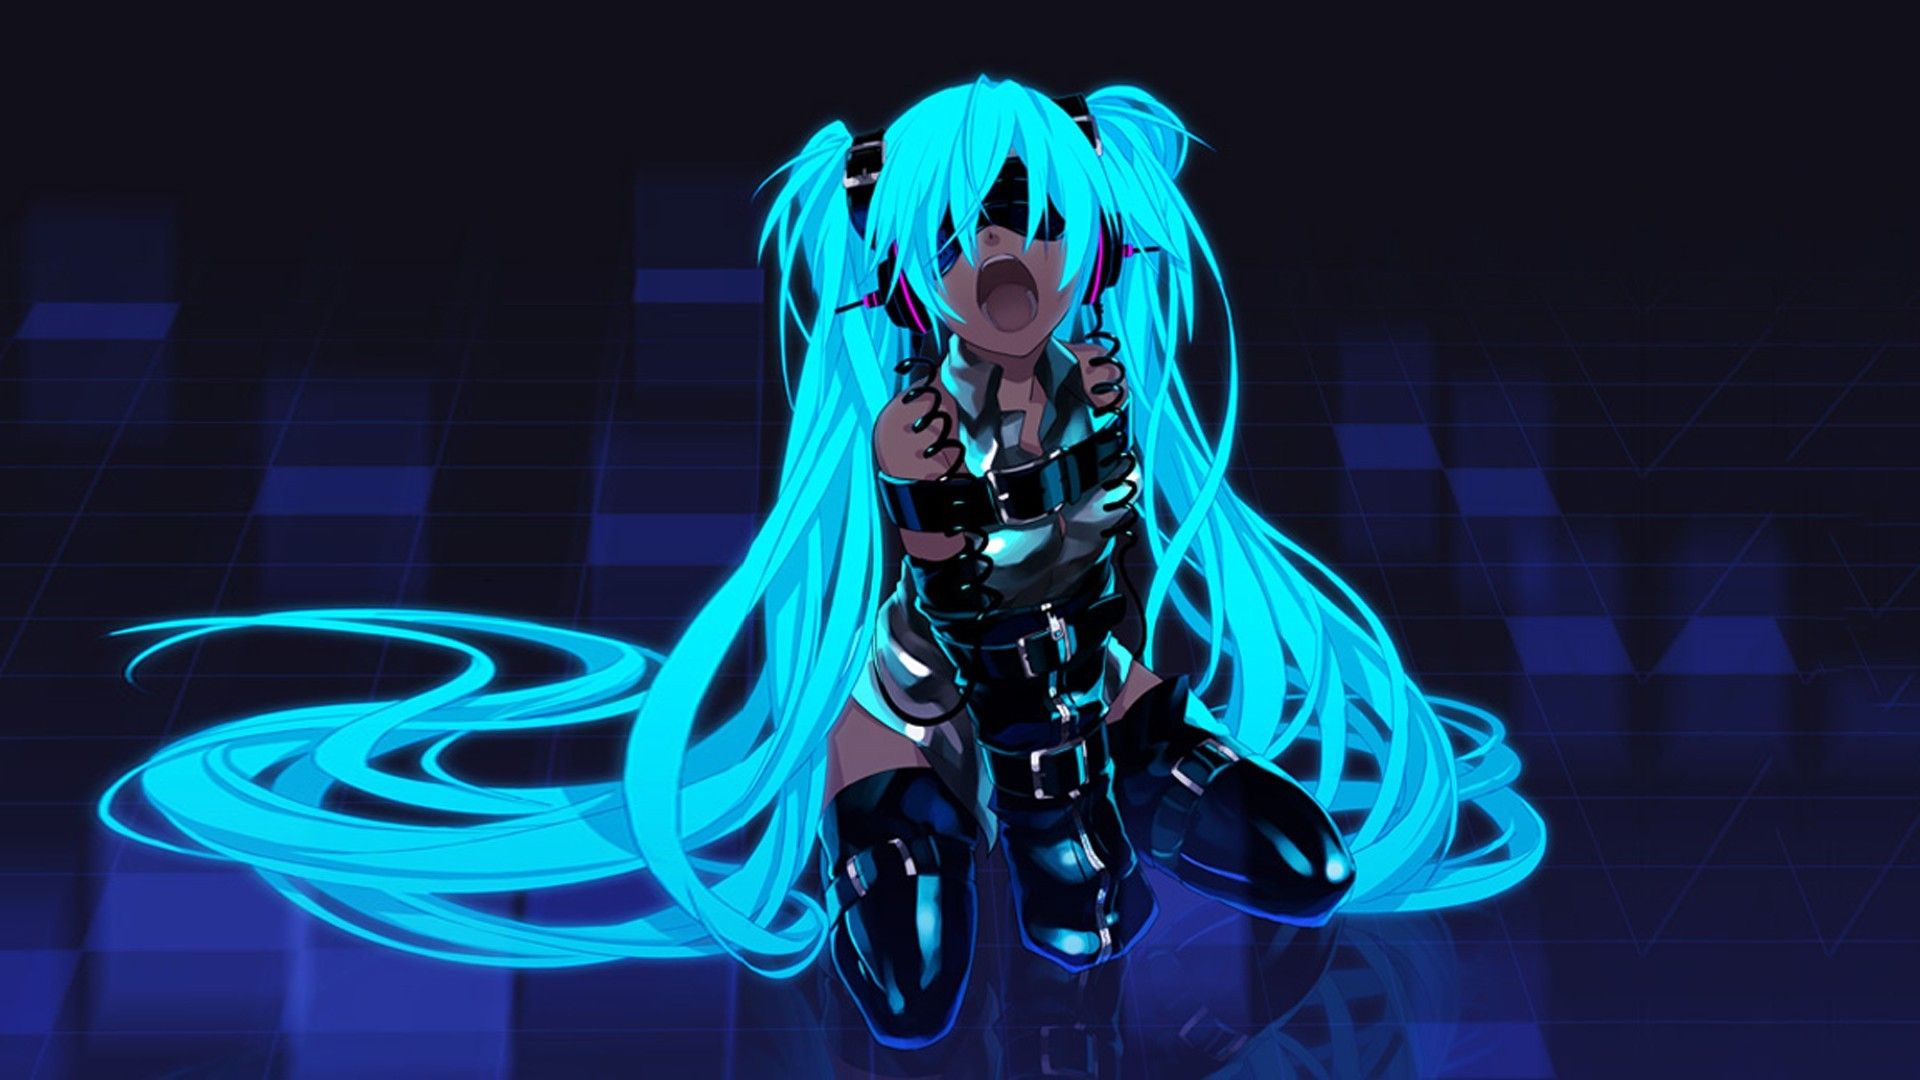 chiquita bullock recommends hatsune miku tied up pic